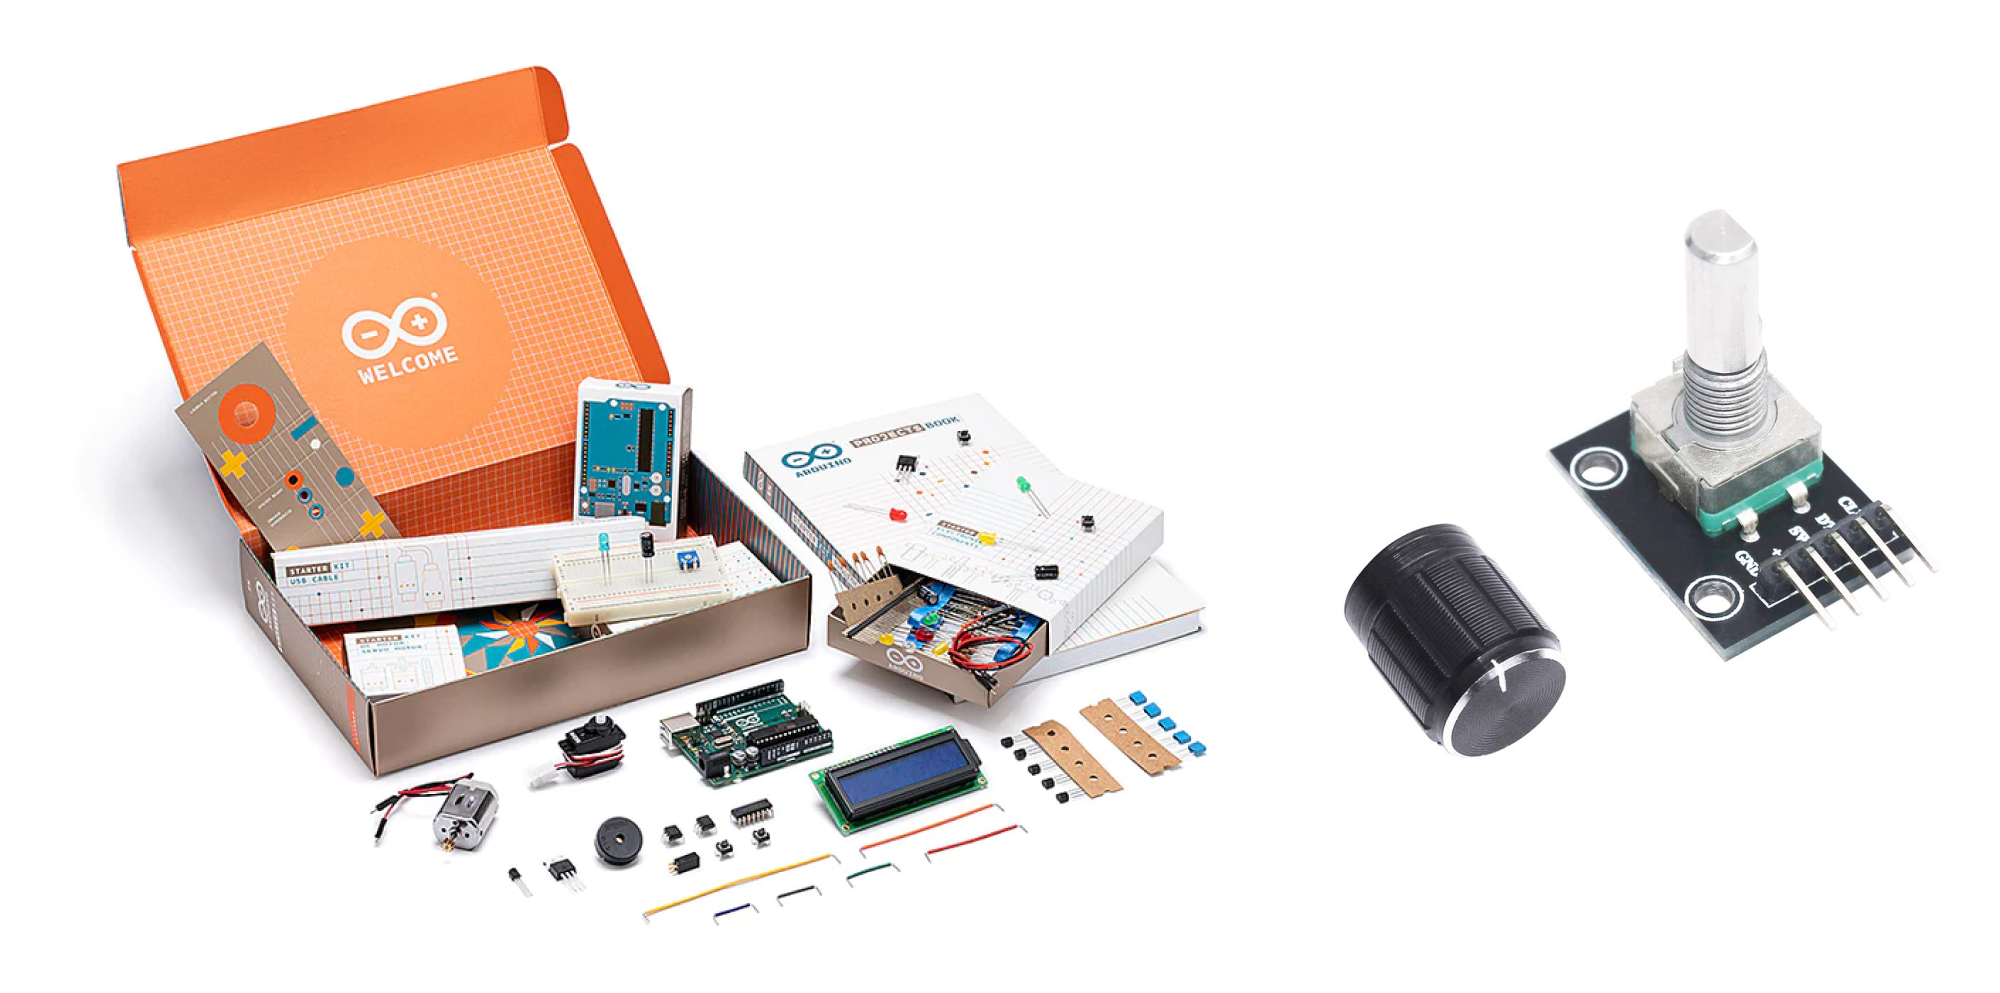 Buy the Official Arduino Starter Kit and some rotary encoders